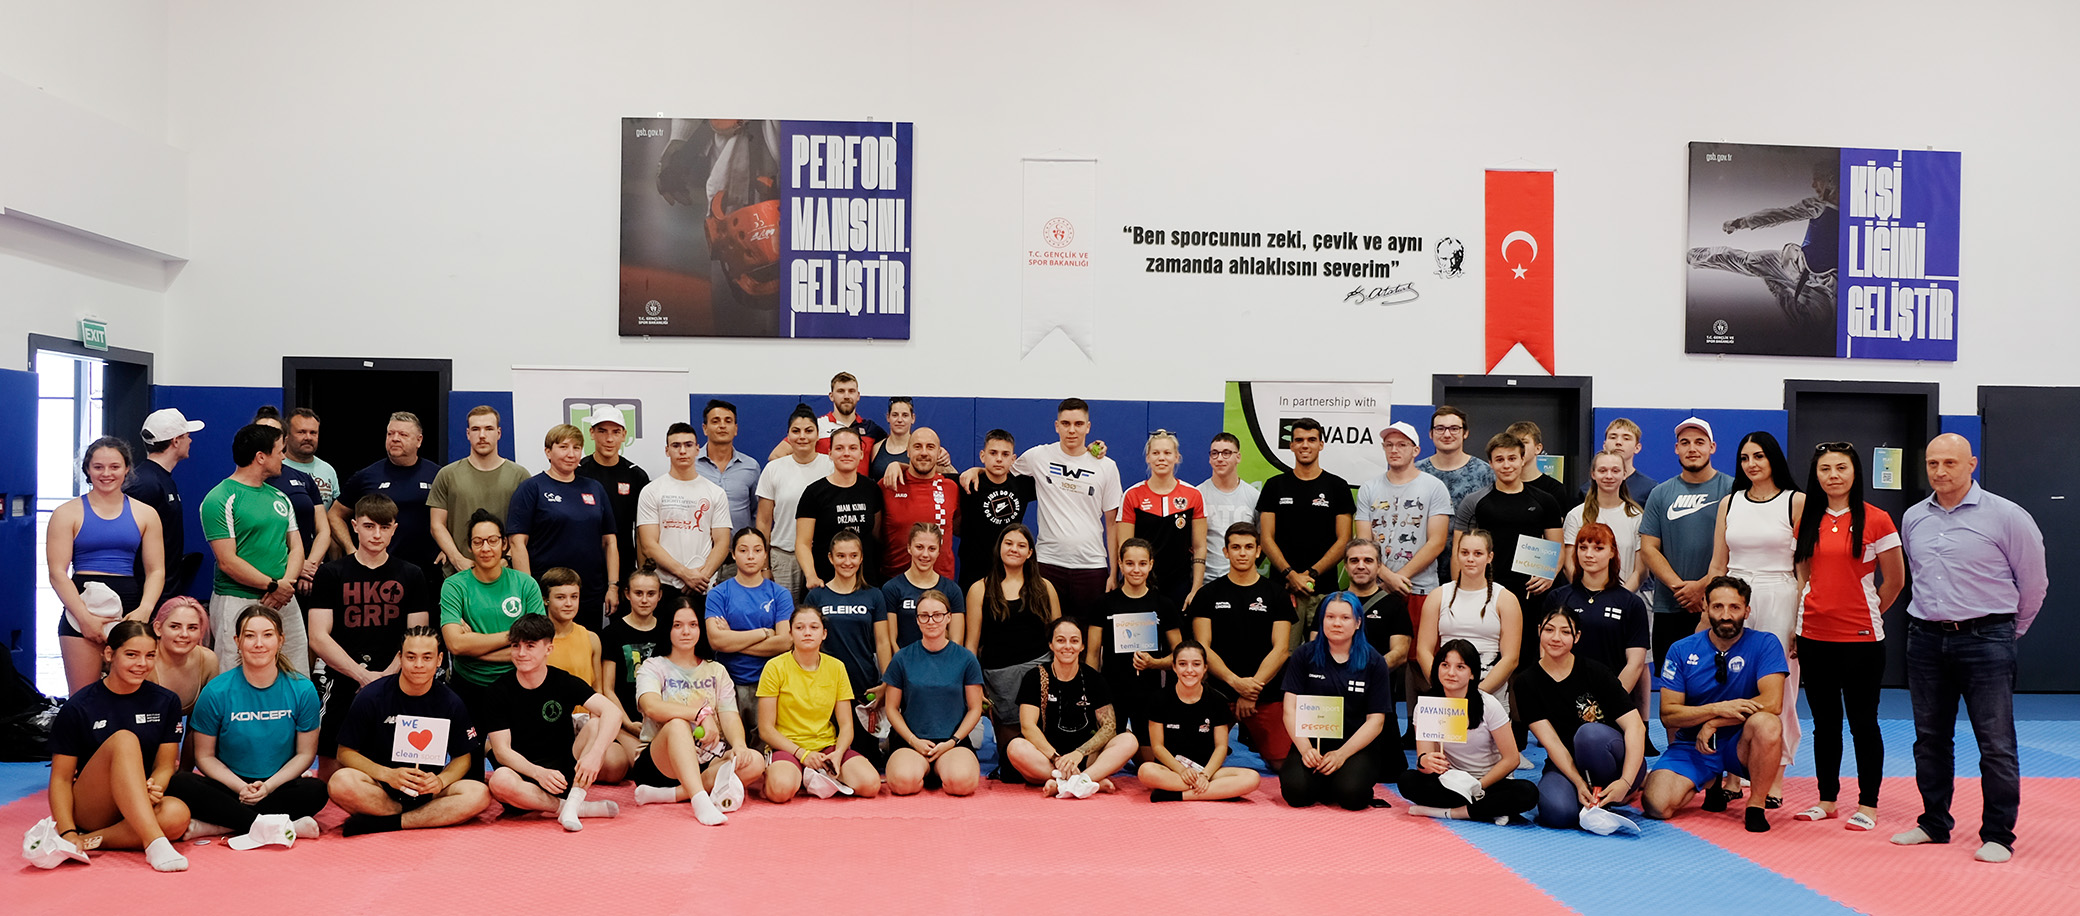 ANTI-DOPING WORKSHOP ORGANIZED AT THE EUROPEAN WEIGHTLIFTING FEDERATION DEVELOPMENT CAMP